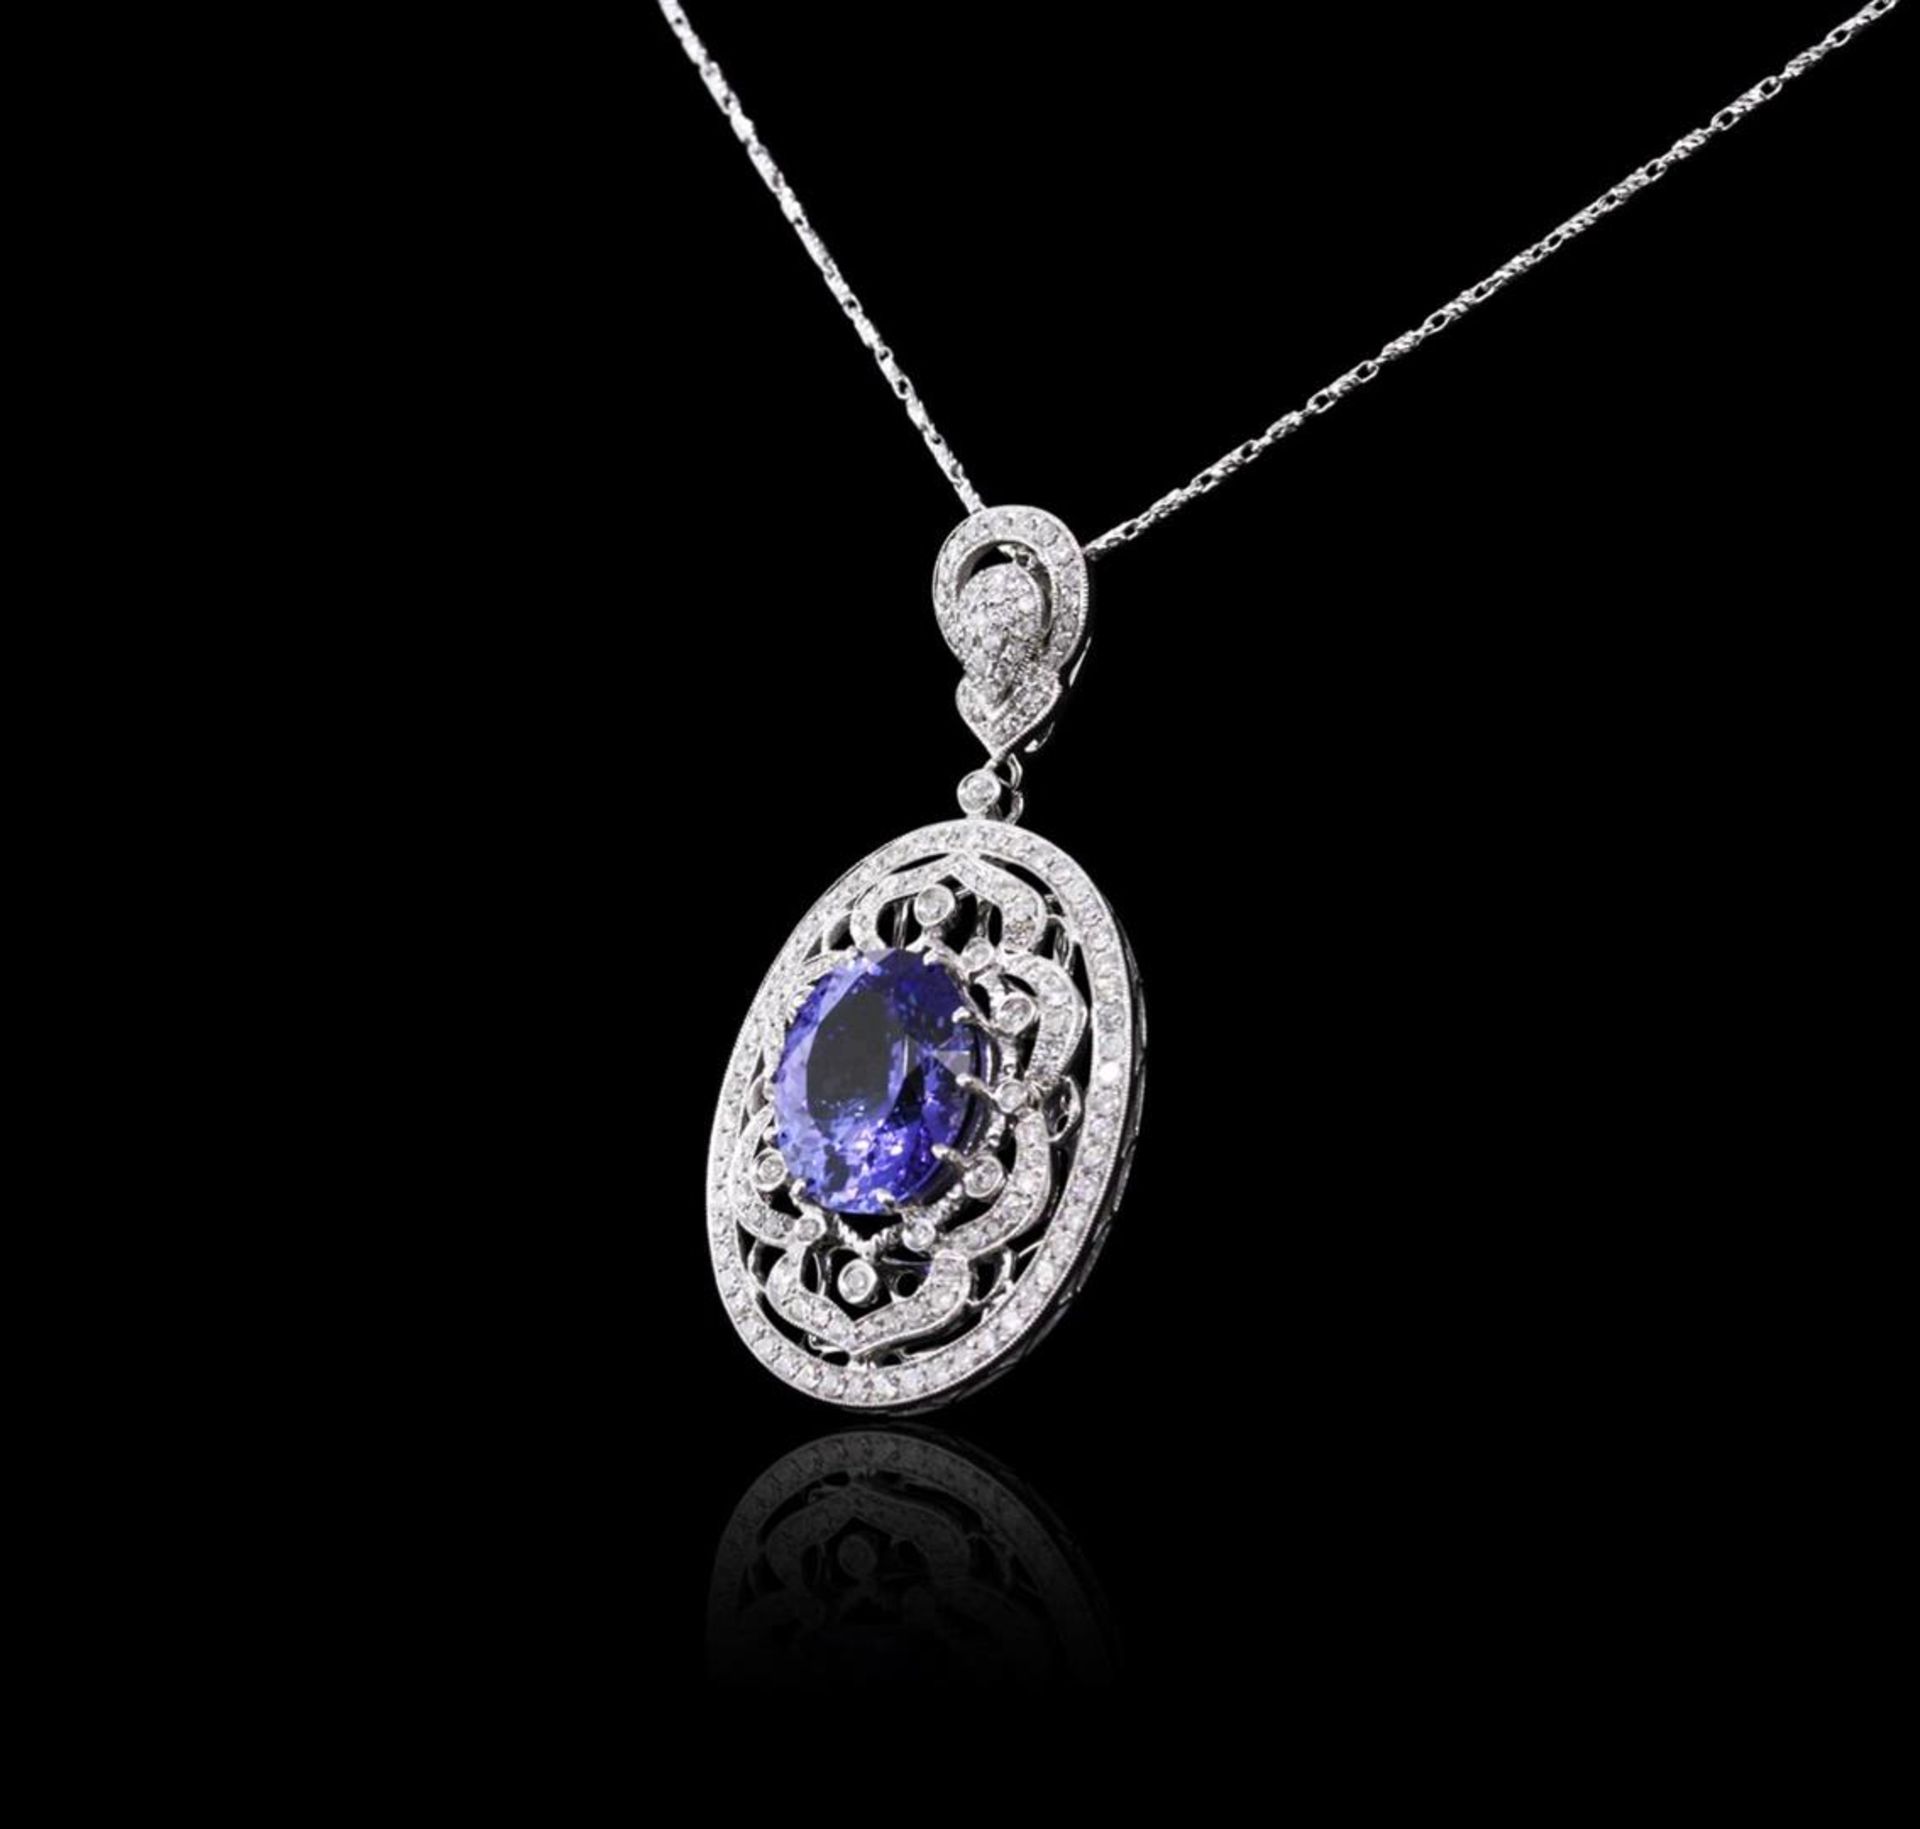 14KT White Gold 8.01 ctw Tanzanite and Diamond Pendant With Chain - Image 5 of 8